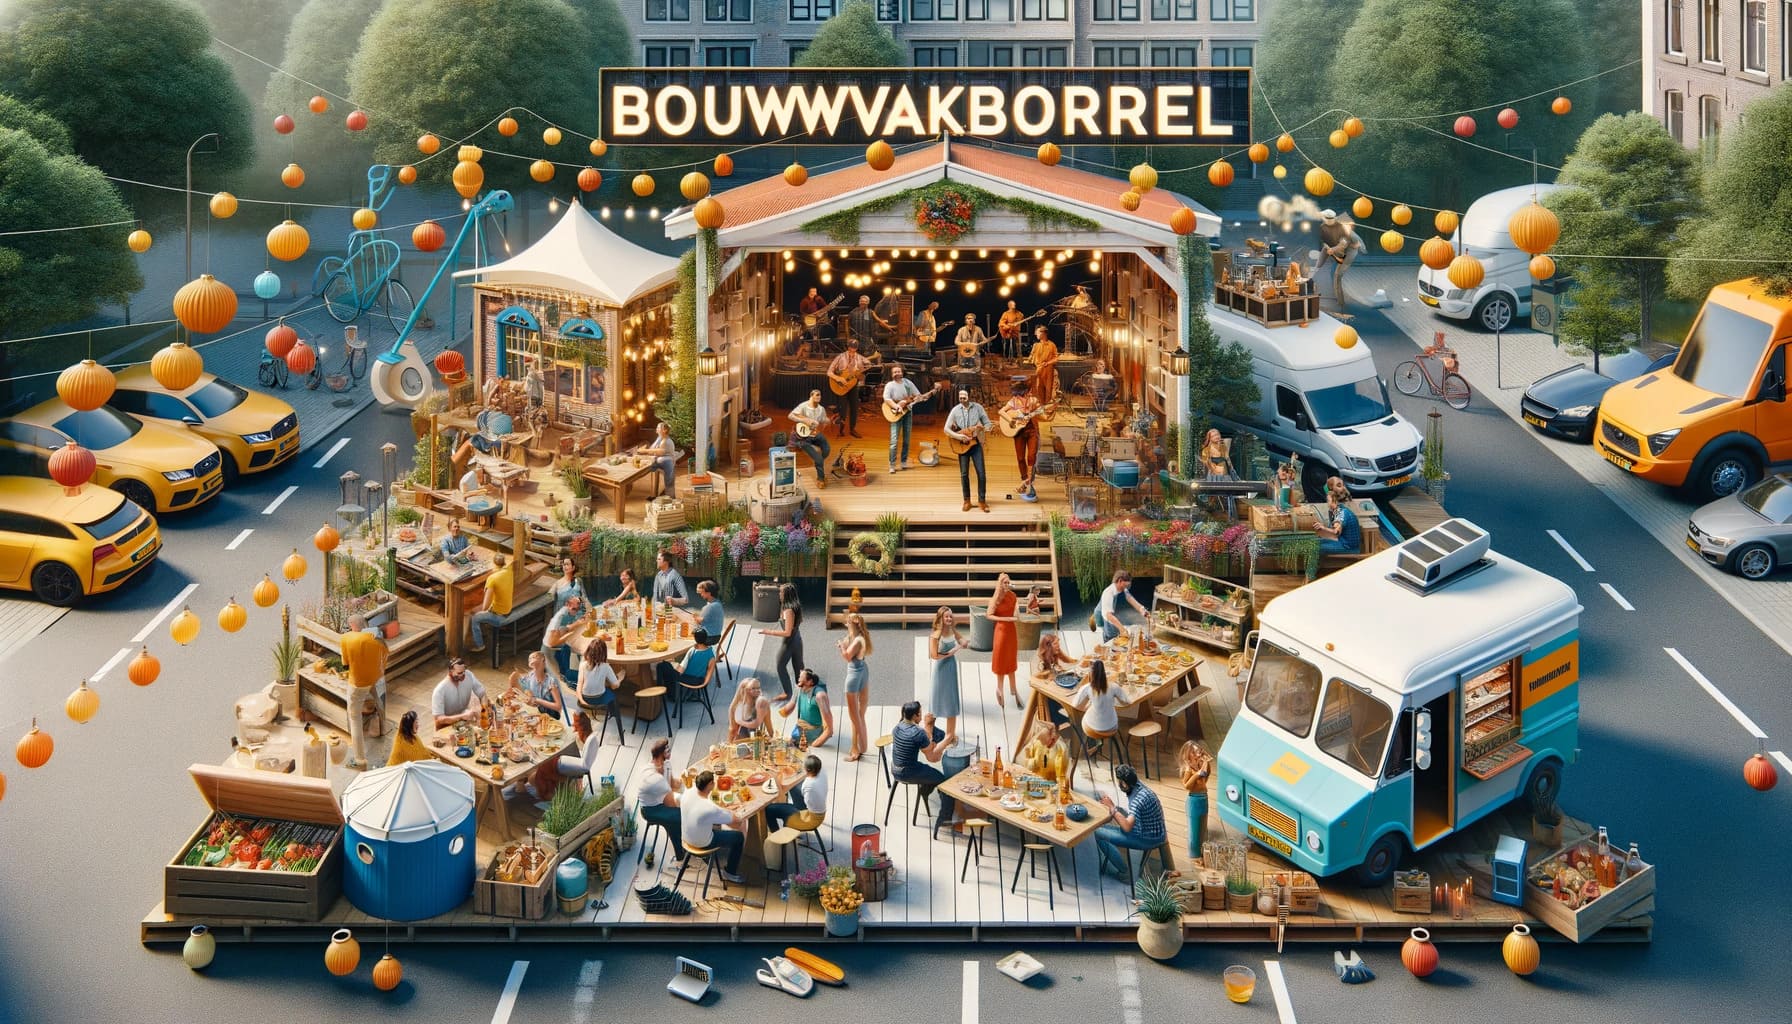 bouwvakborrel event featuring a mix of traditional and modern elements to showcase a blend of culture an